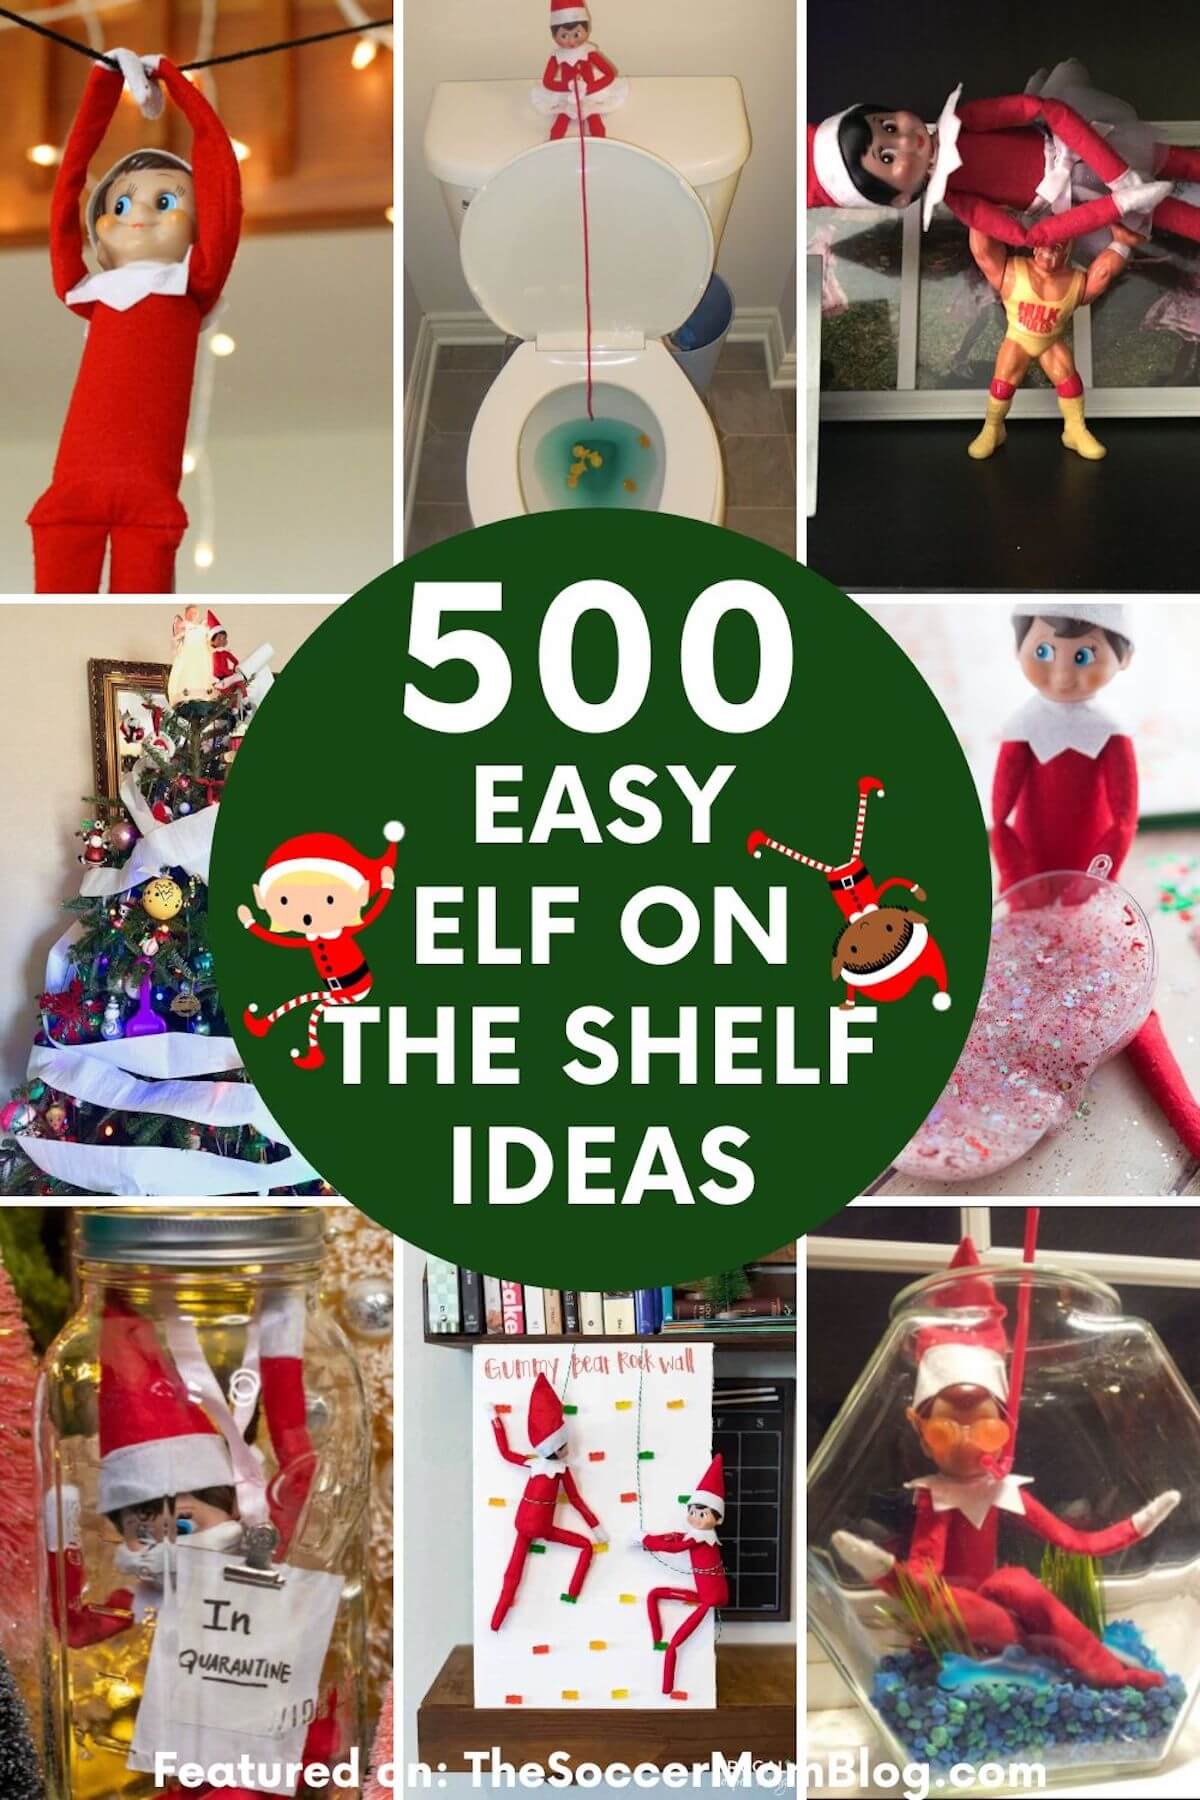 collage of Elf on the Shelf dolls doing funny activities; text overlay "500 Easy Elf on the Shelf Ideas".